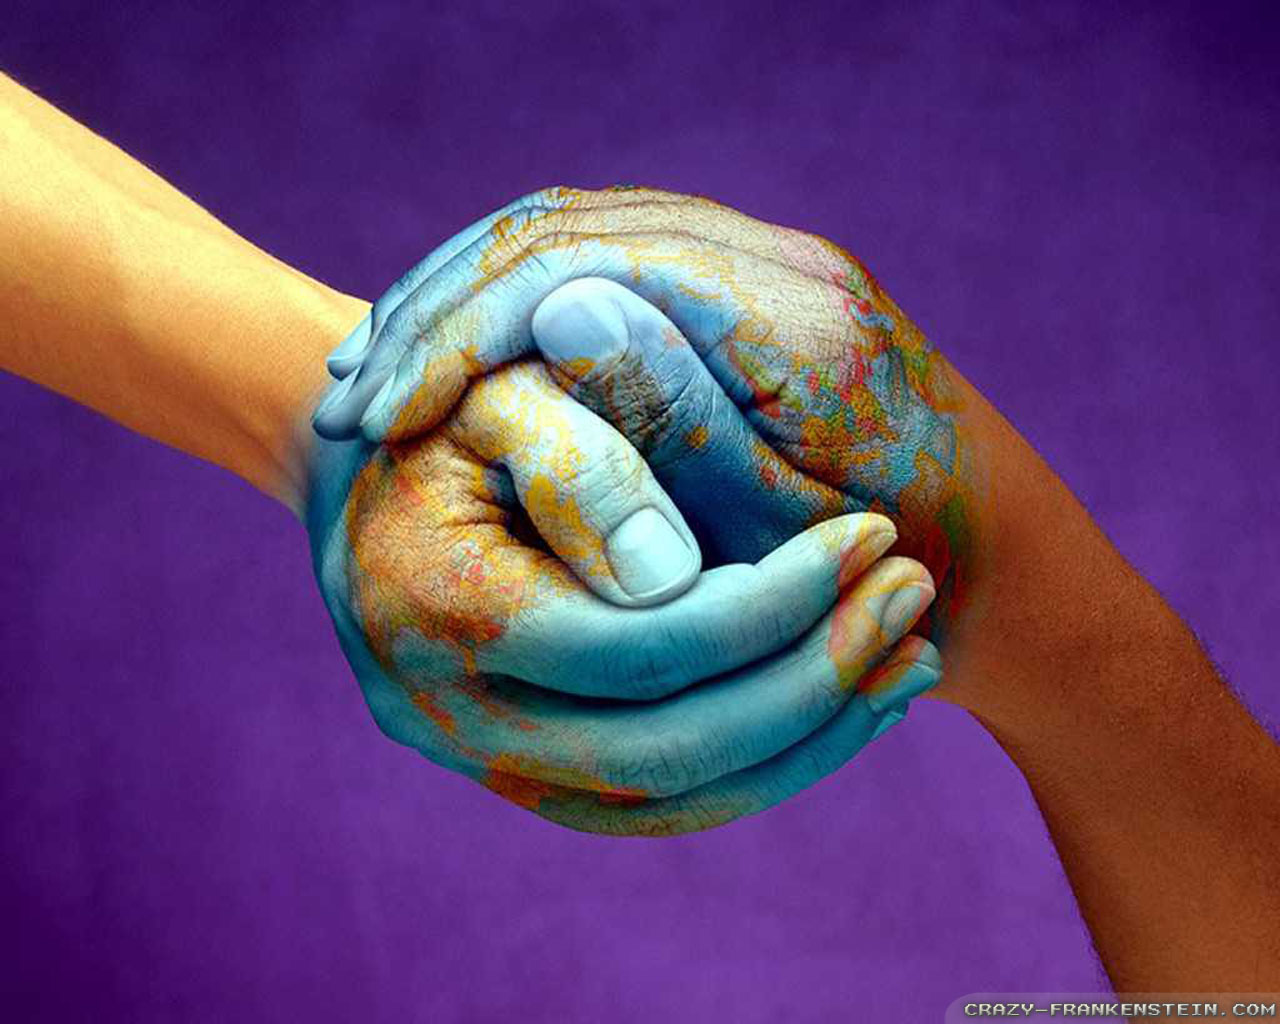 world-peace-in-our-hands-wallpapers-1280x1024.jpg